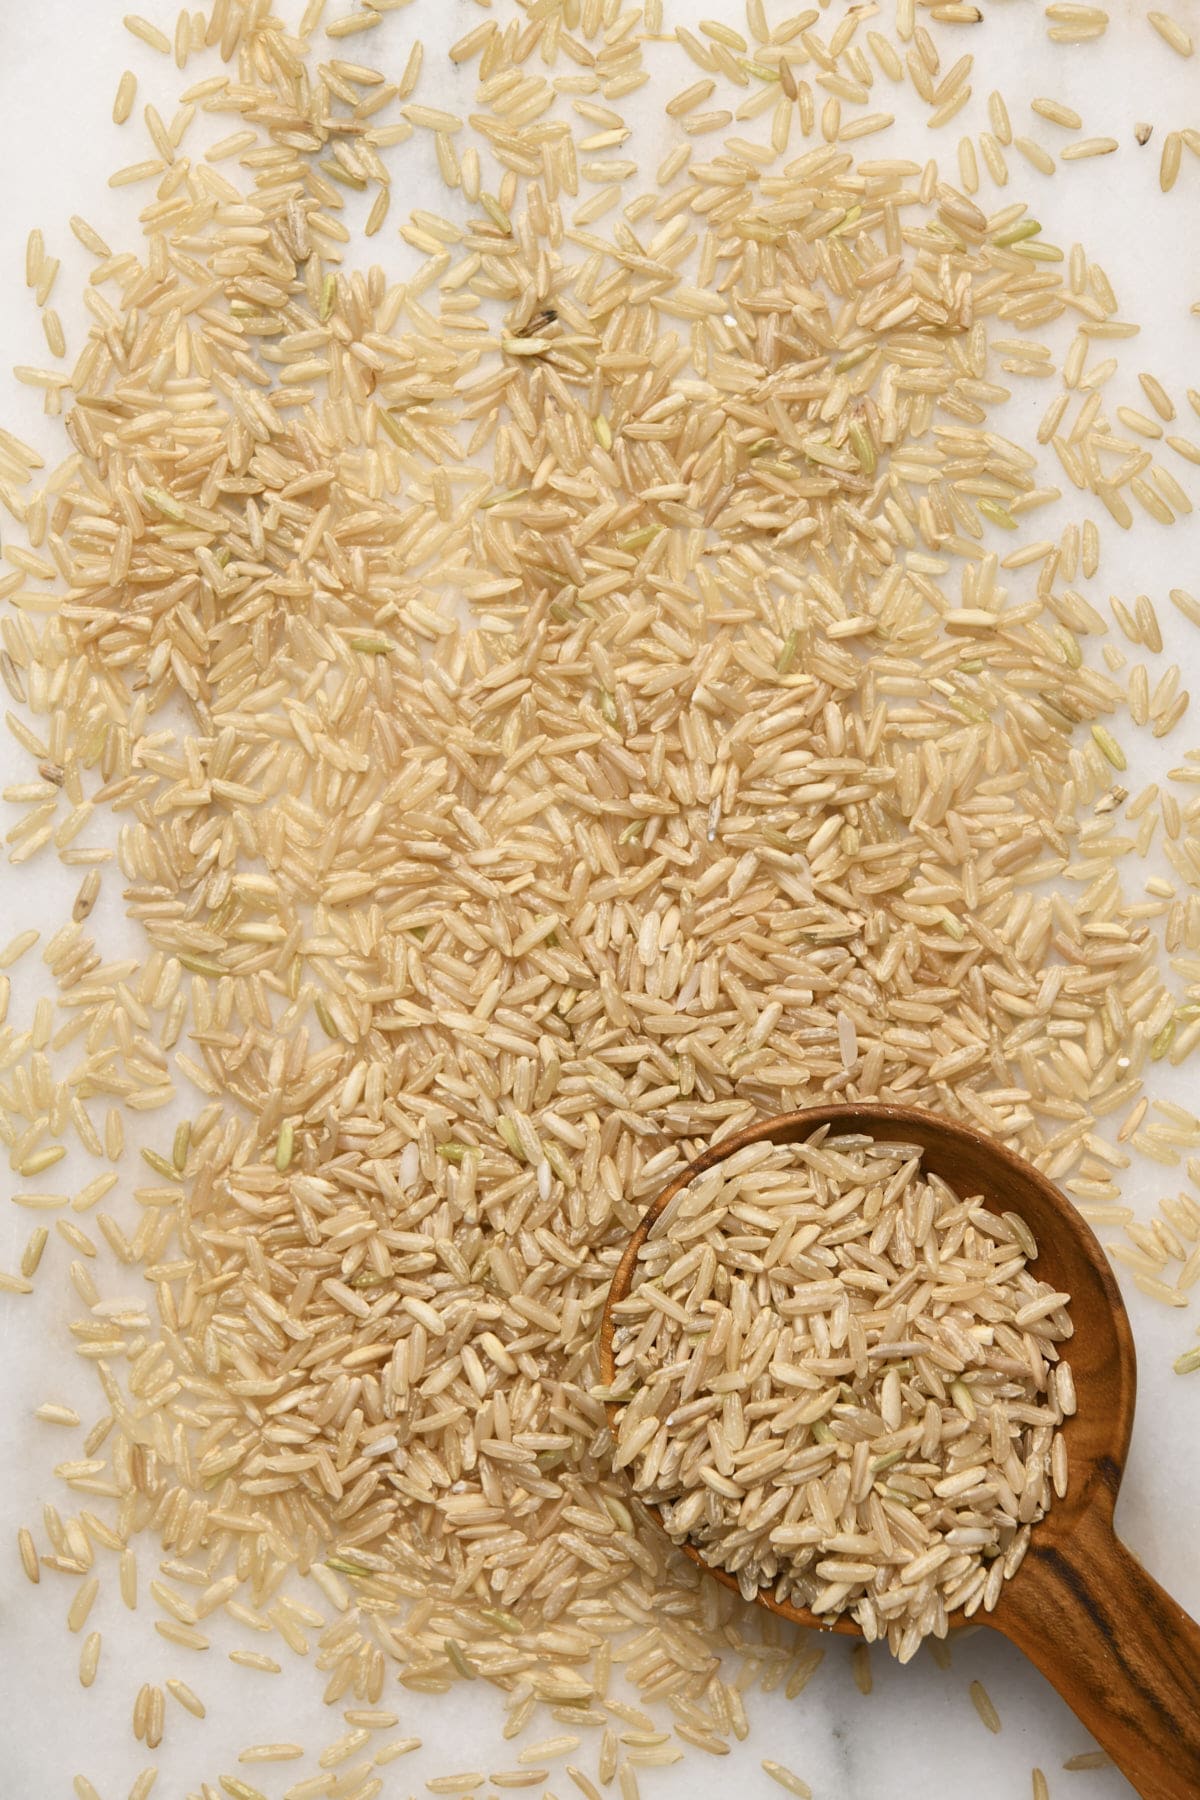 Photo of brown rice with a wooden scoop on a marble surface.